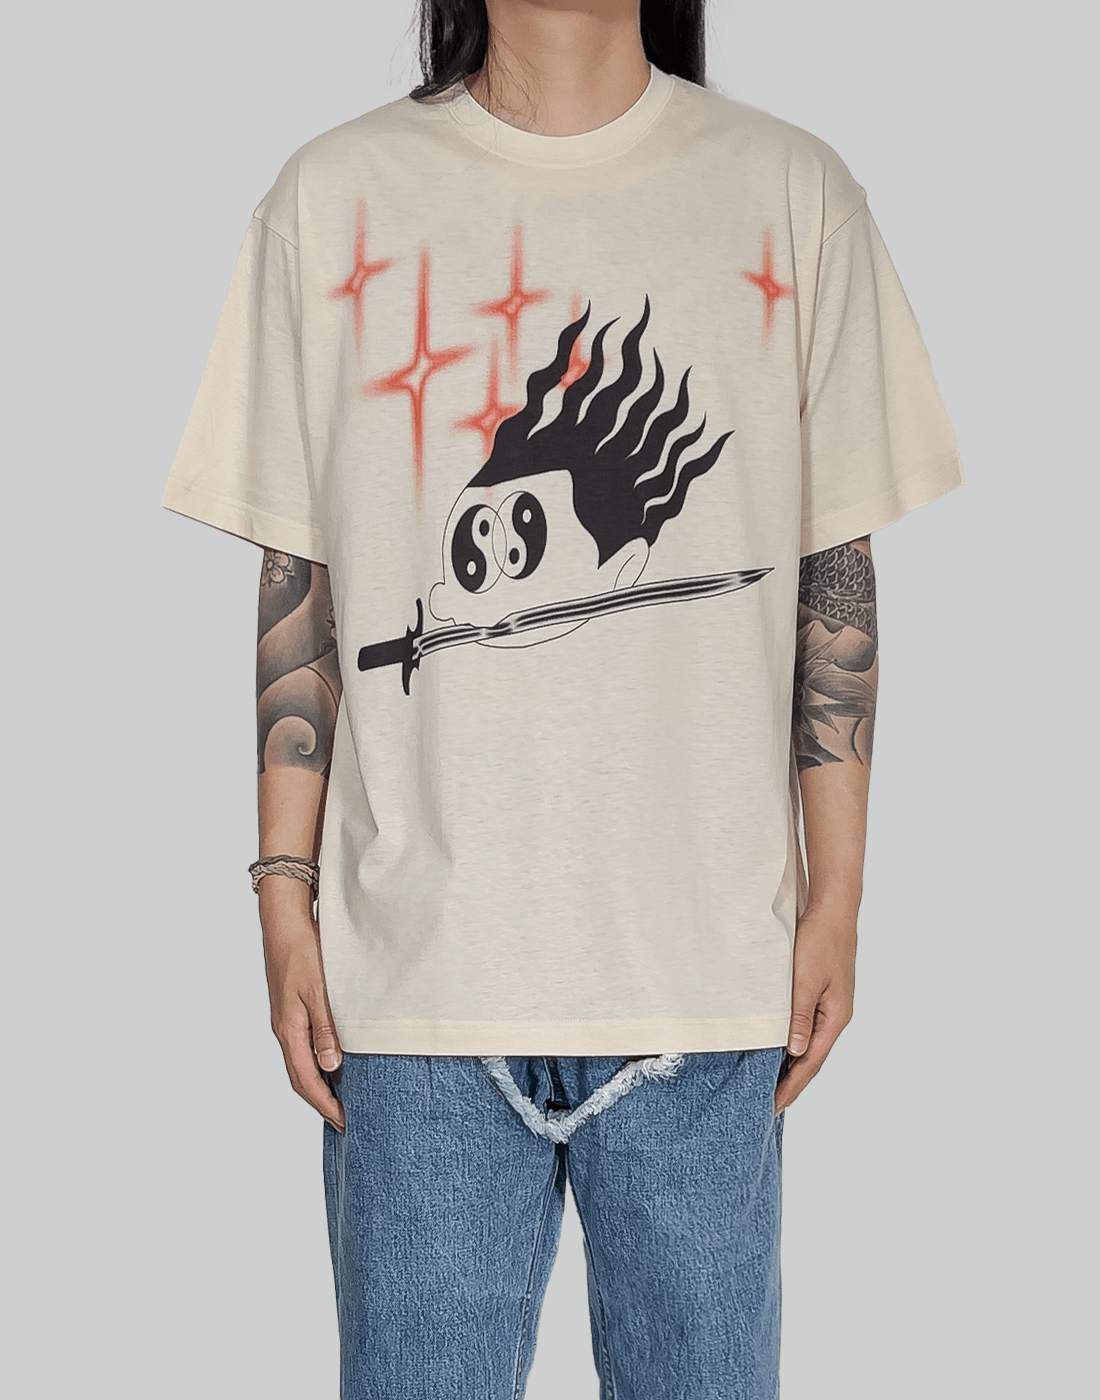 SANKUANZ Boy with a Sword in the Mouth Tee - 082plus